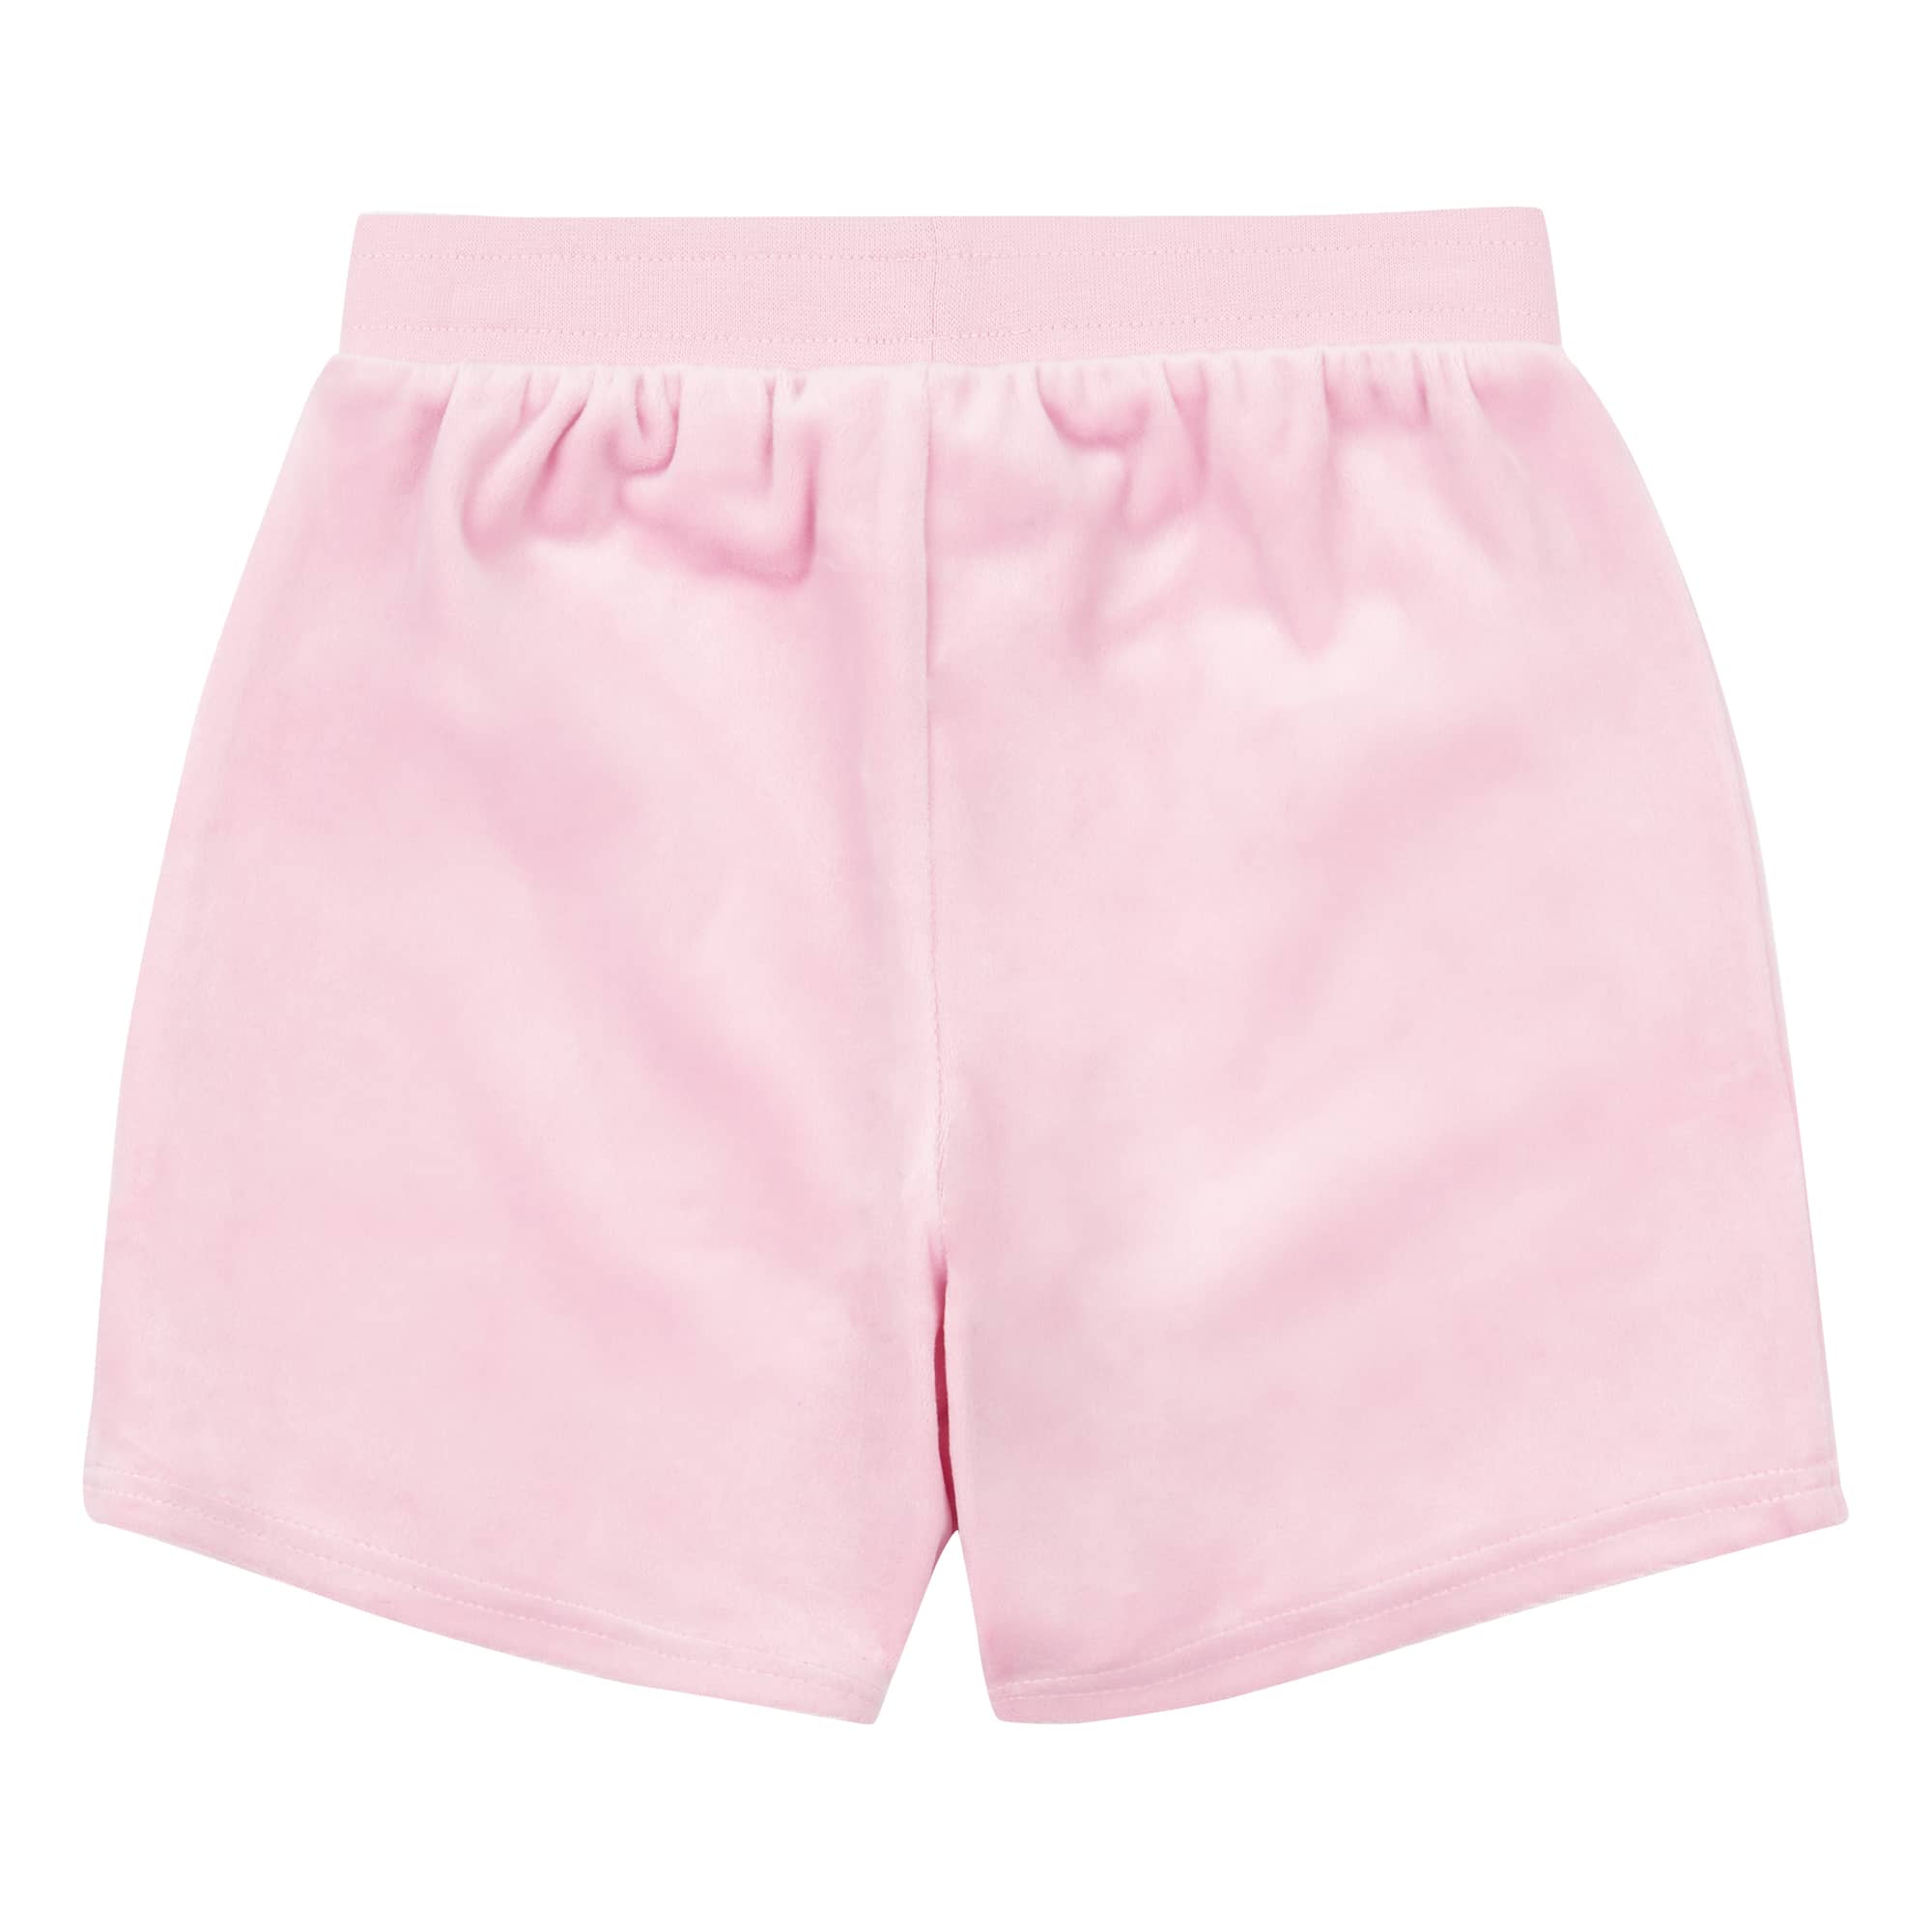 Juicy Couture girls pink shorts back view